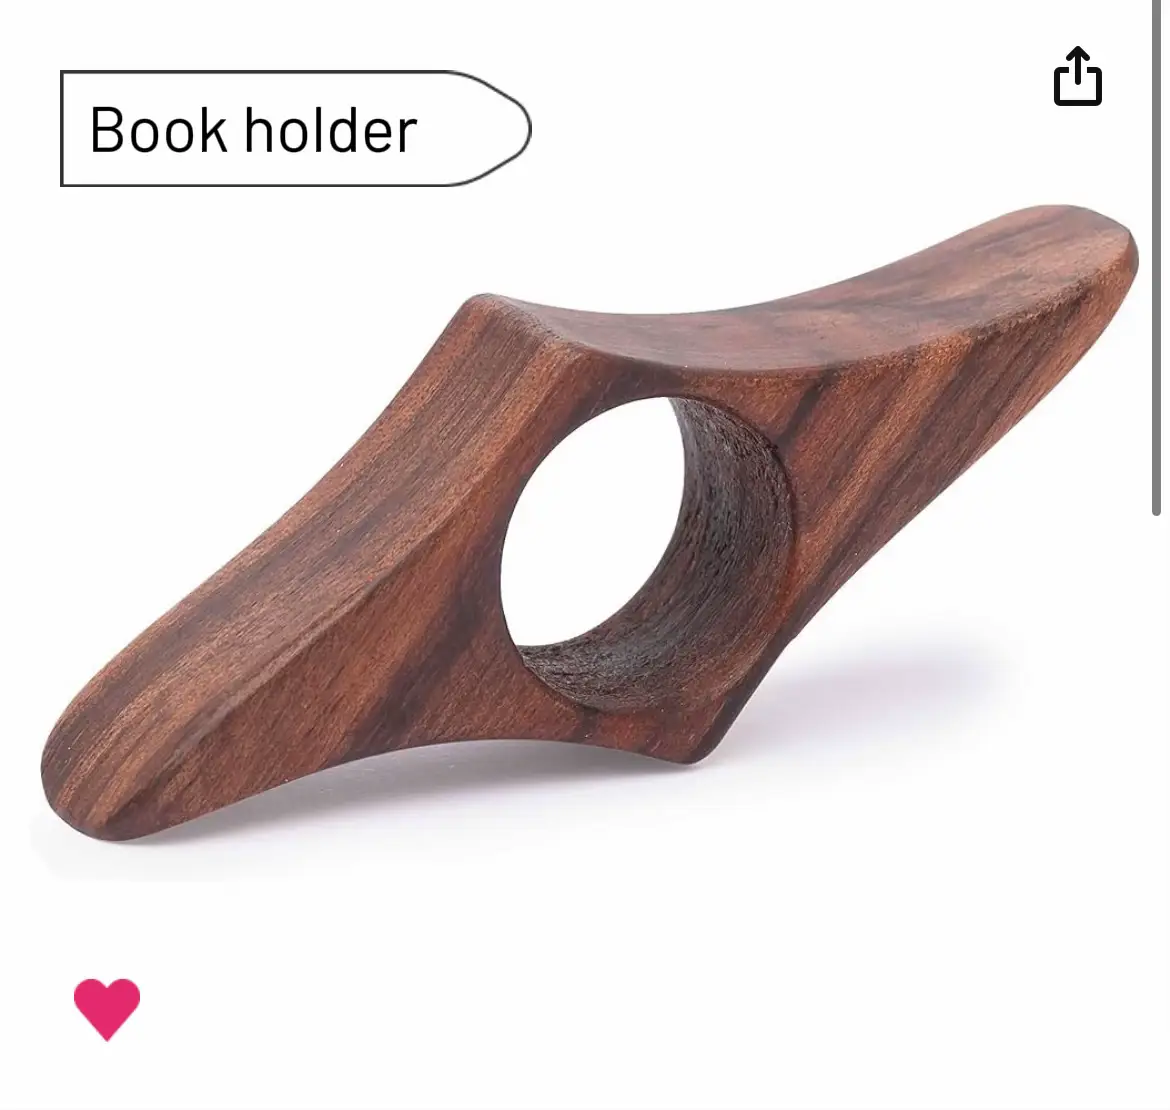  A book holder with a wooden design.